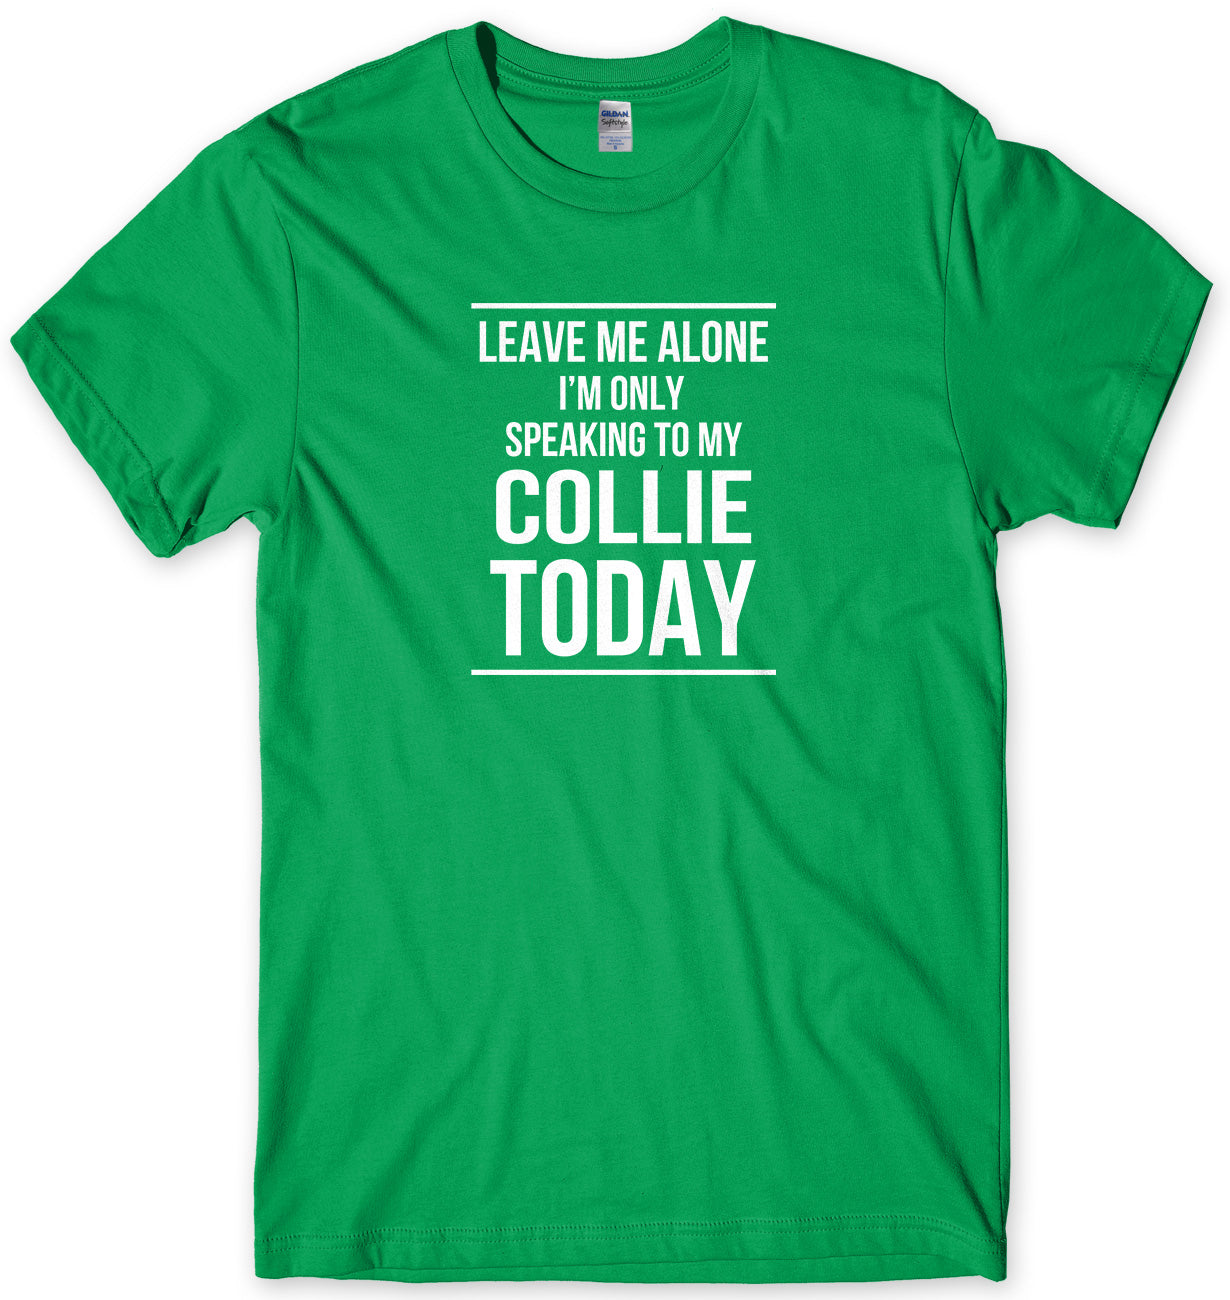 LEAVE ME ALONE I'M ONLY SPEAKING TO MY COLLIE TODAY MENS FUNNY SLOGAN UNISEX T-SHIRT